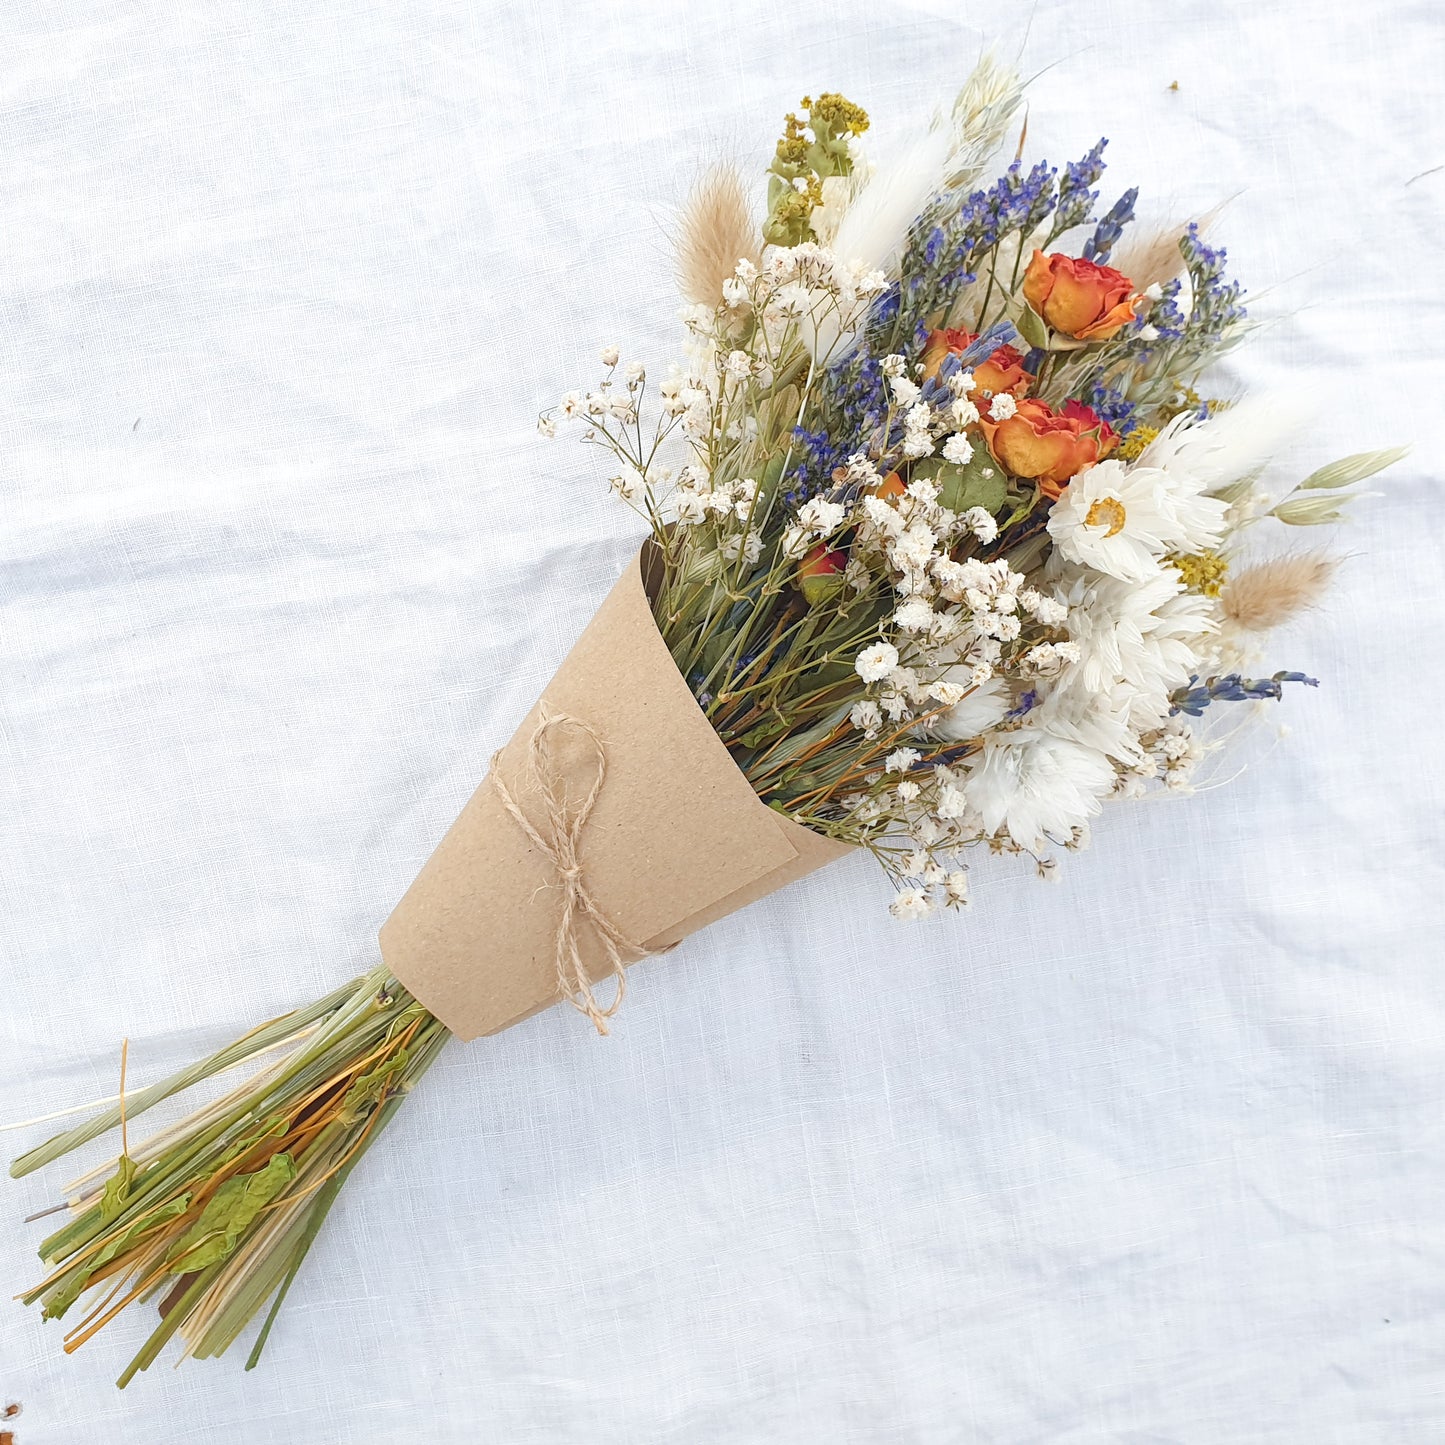 A dried flower bouquet wrapped in a kraft card cone is laid on a white linen cloth. It has small orange roses, white daisies with yellow centres, lilac sea lavender and pretty white gypsophila among other grasses and fillers. 